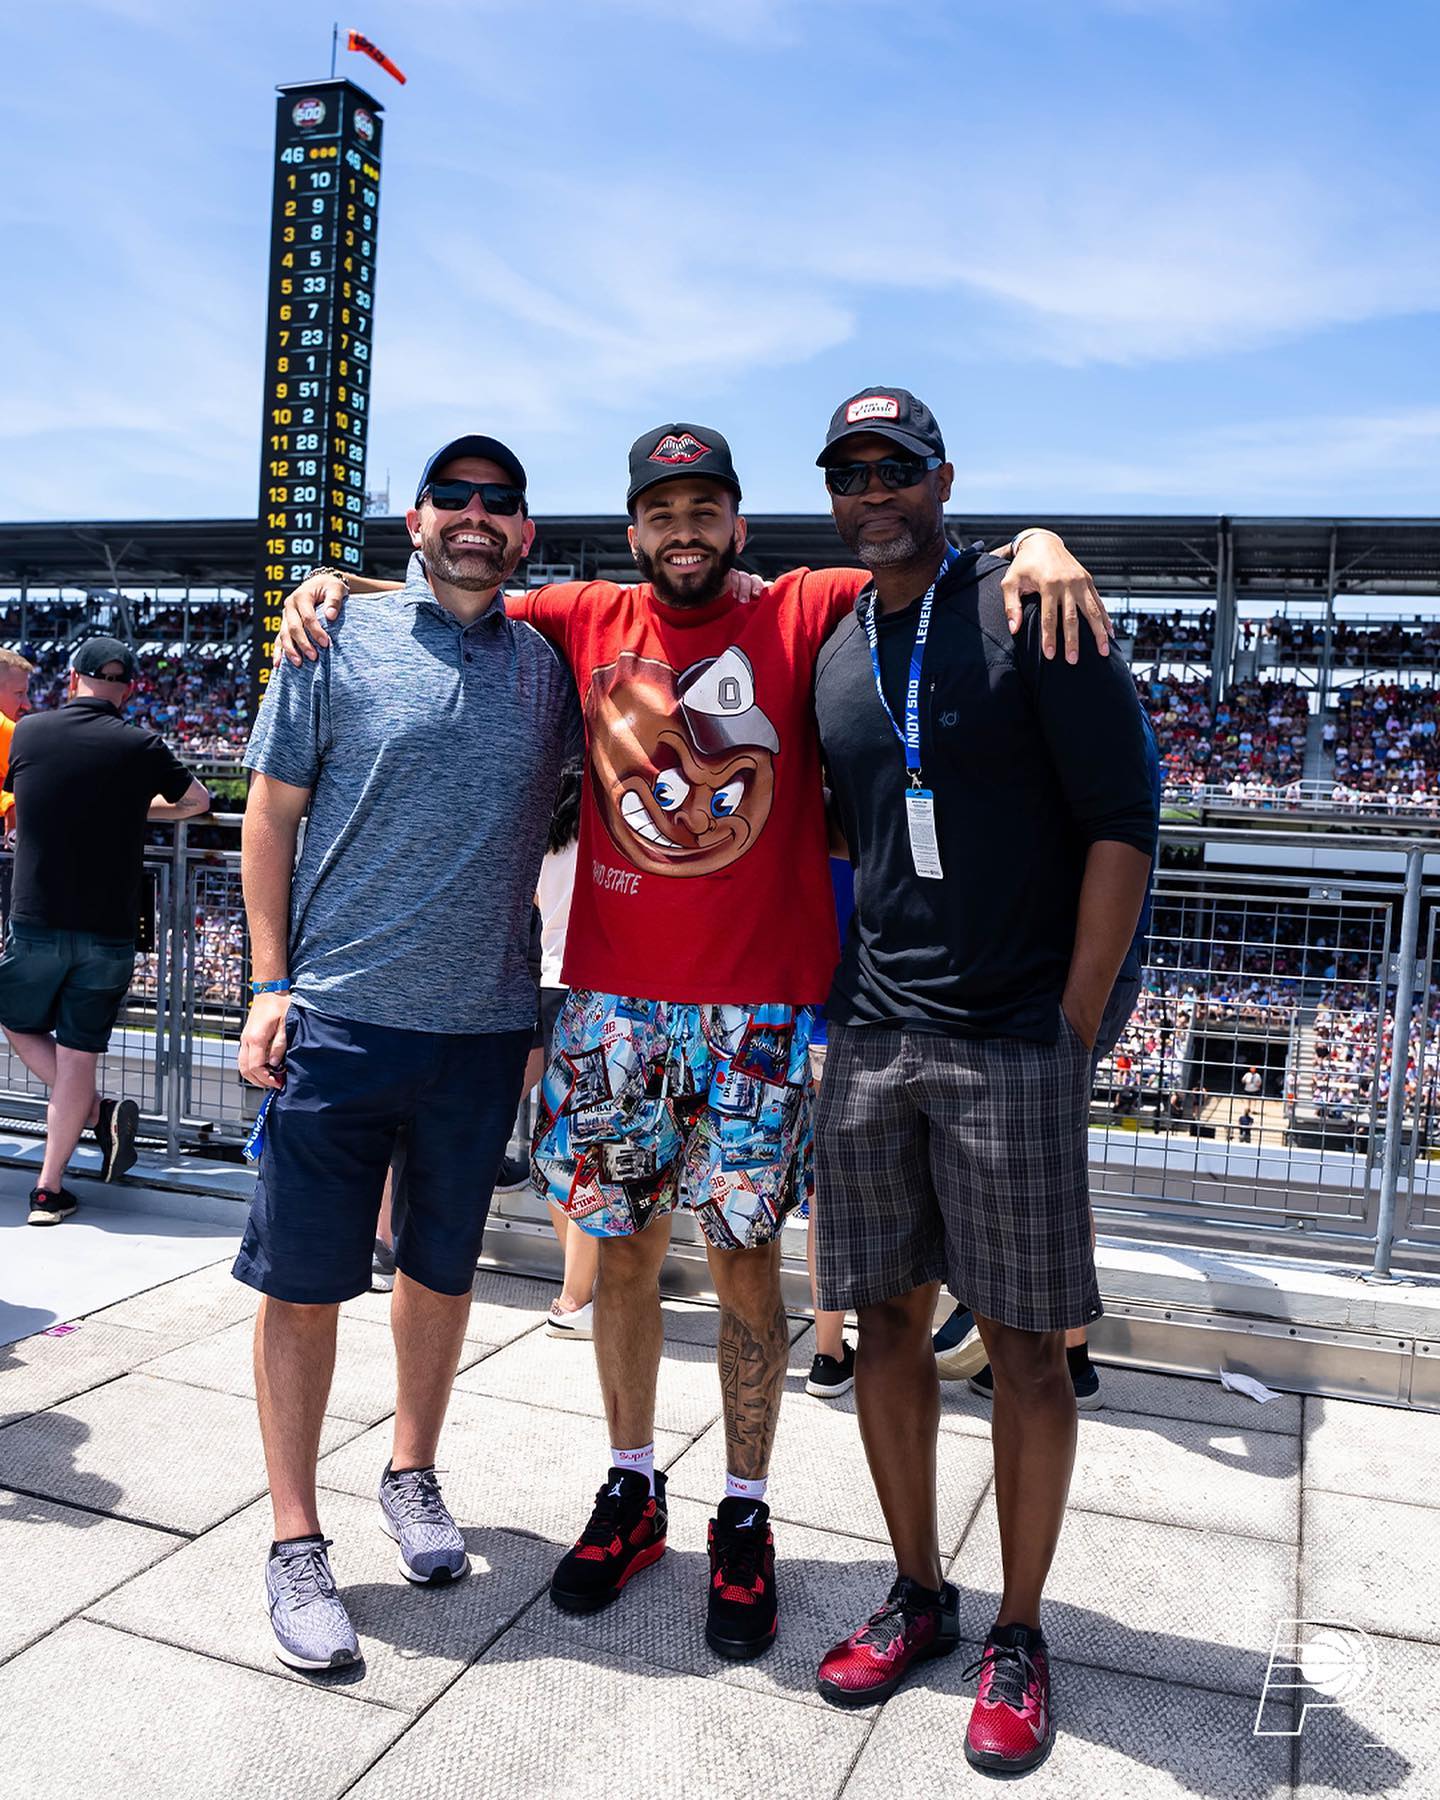 a great day at the track.  #Indy500 x #ThisIsMay...